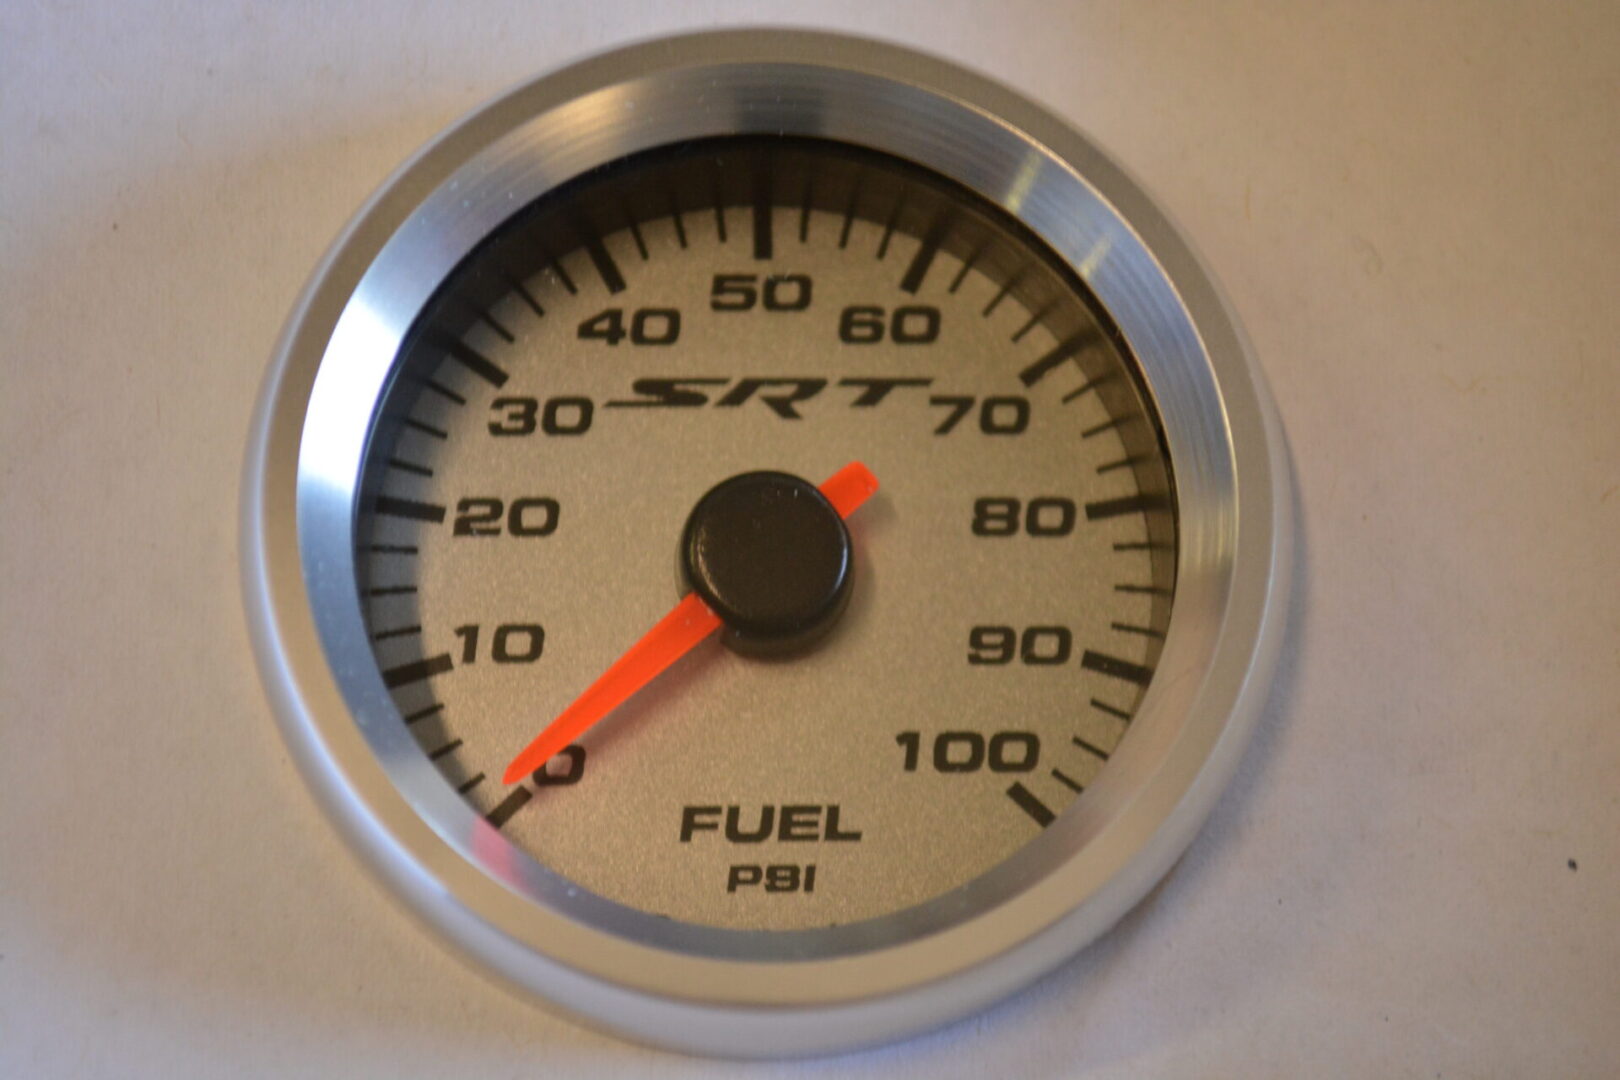 A fuel pressure gauge is shown with the needle pointing to 1 0 0 psi.